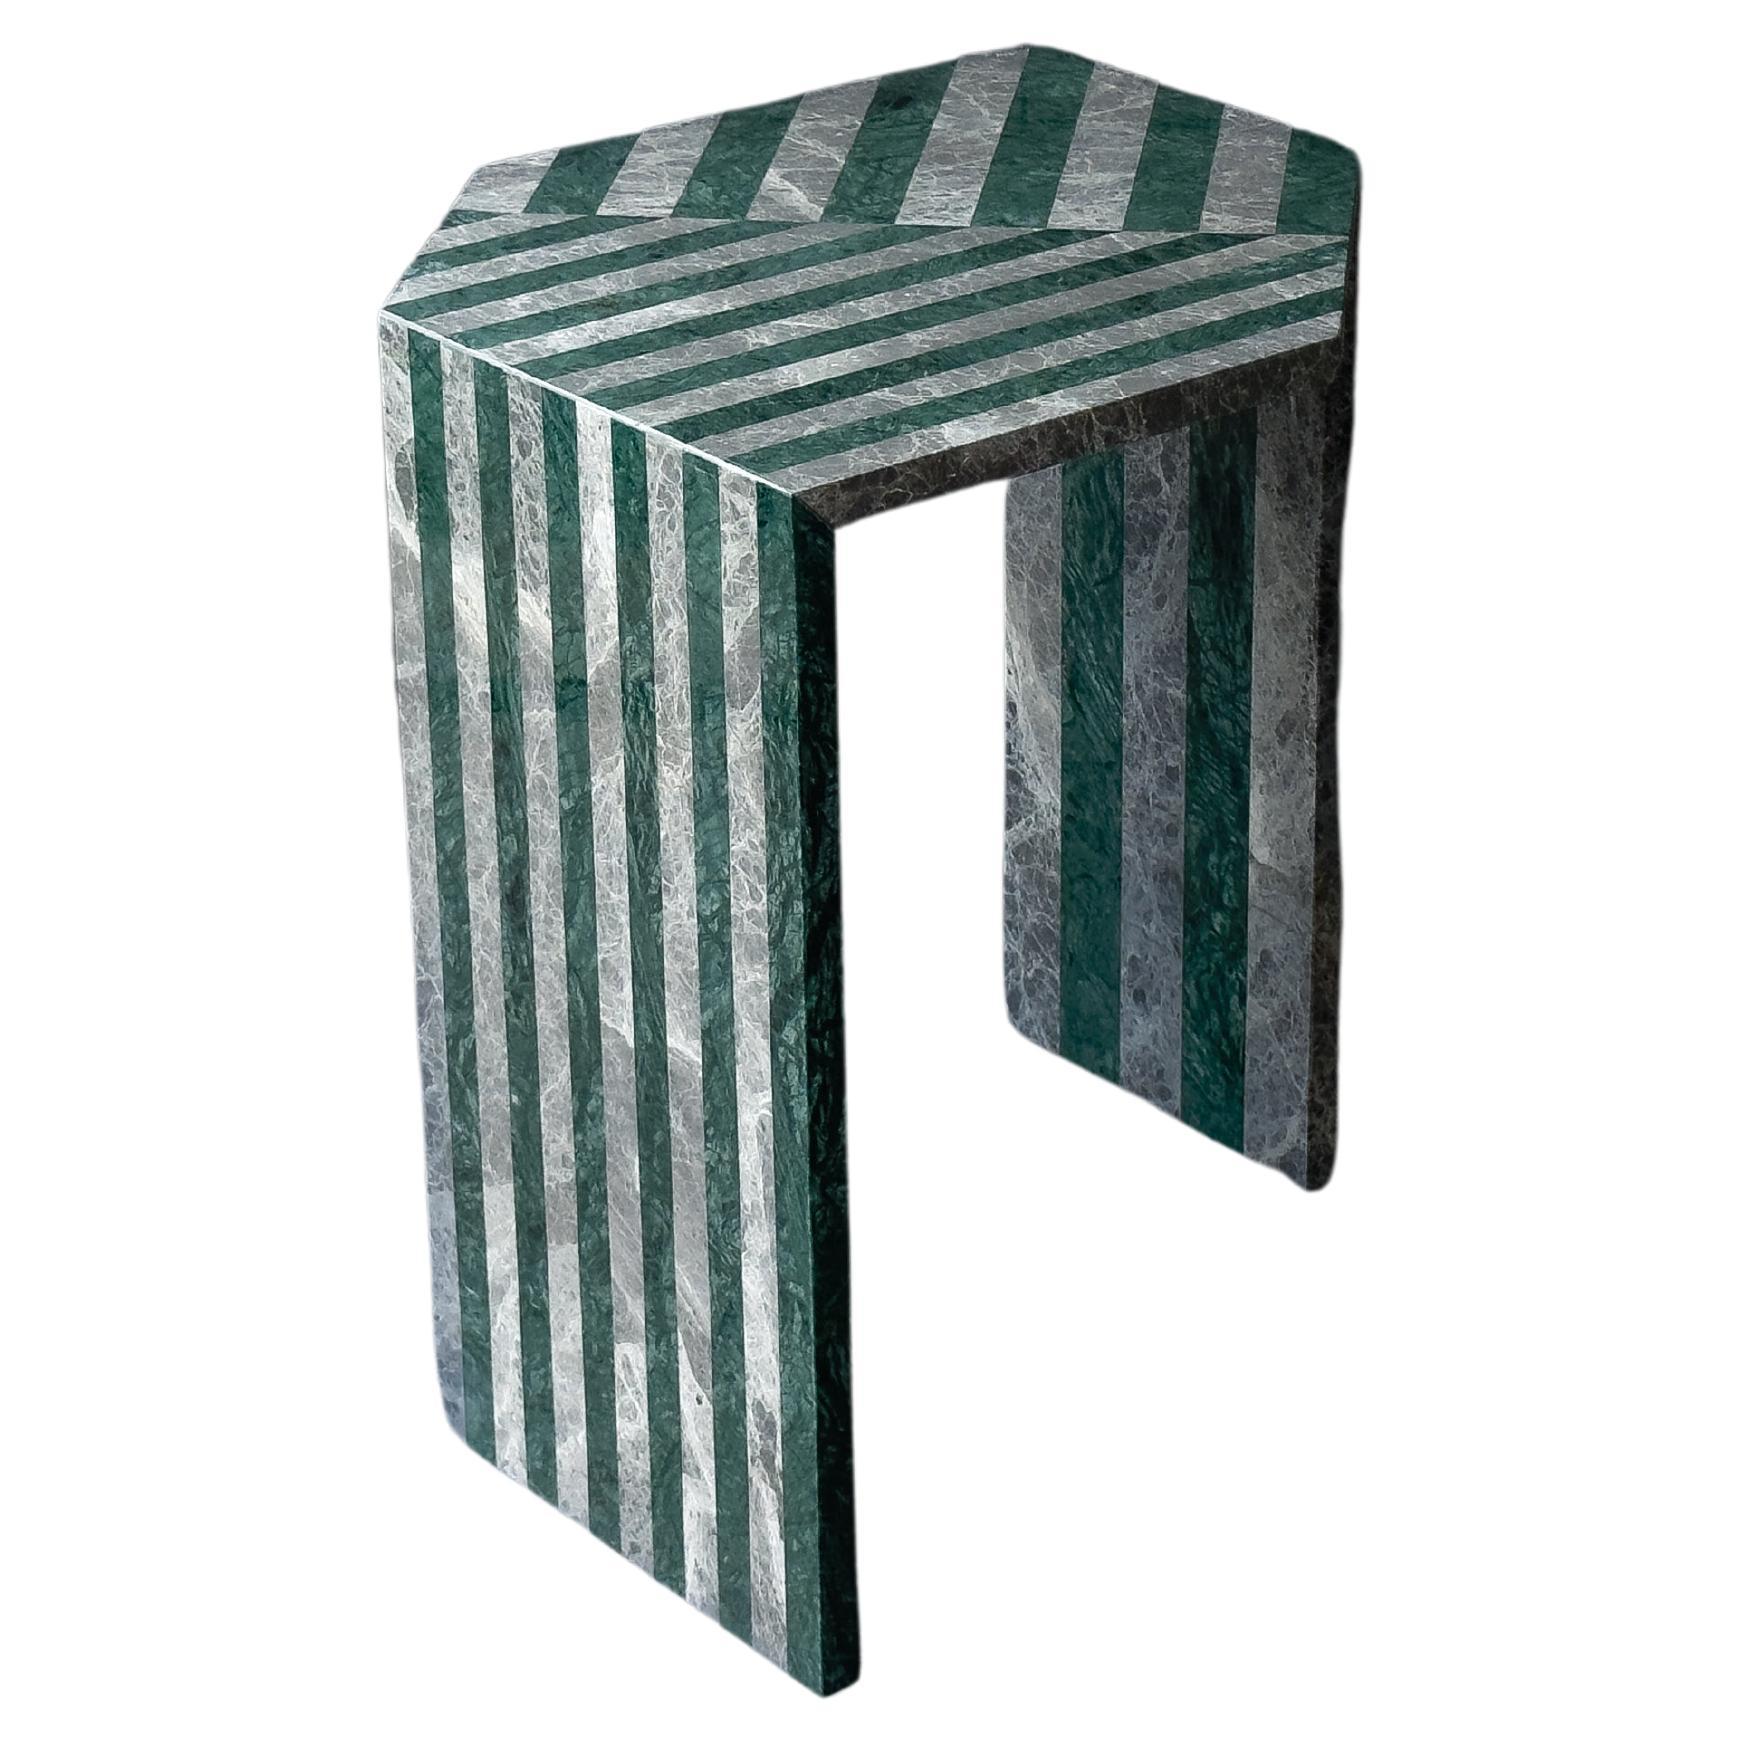 LINEA Side Table in Green & Grey Marble by Meble Matters